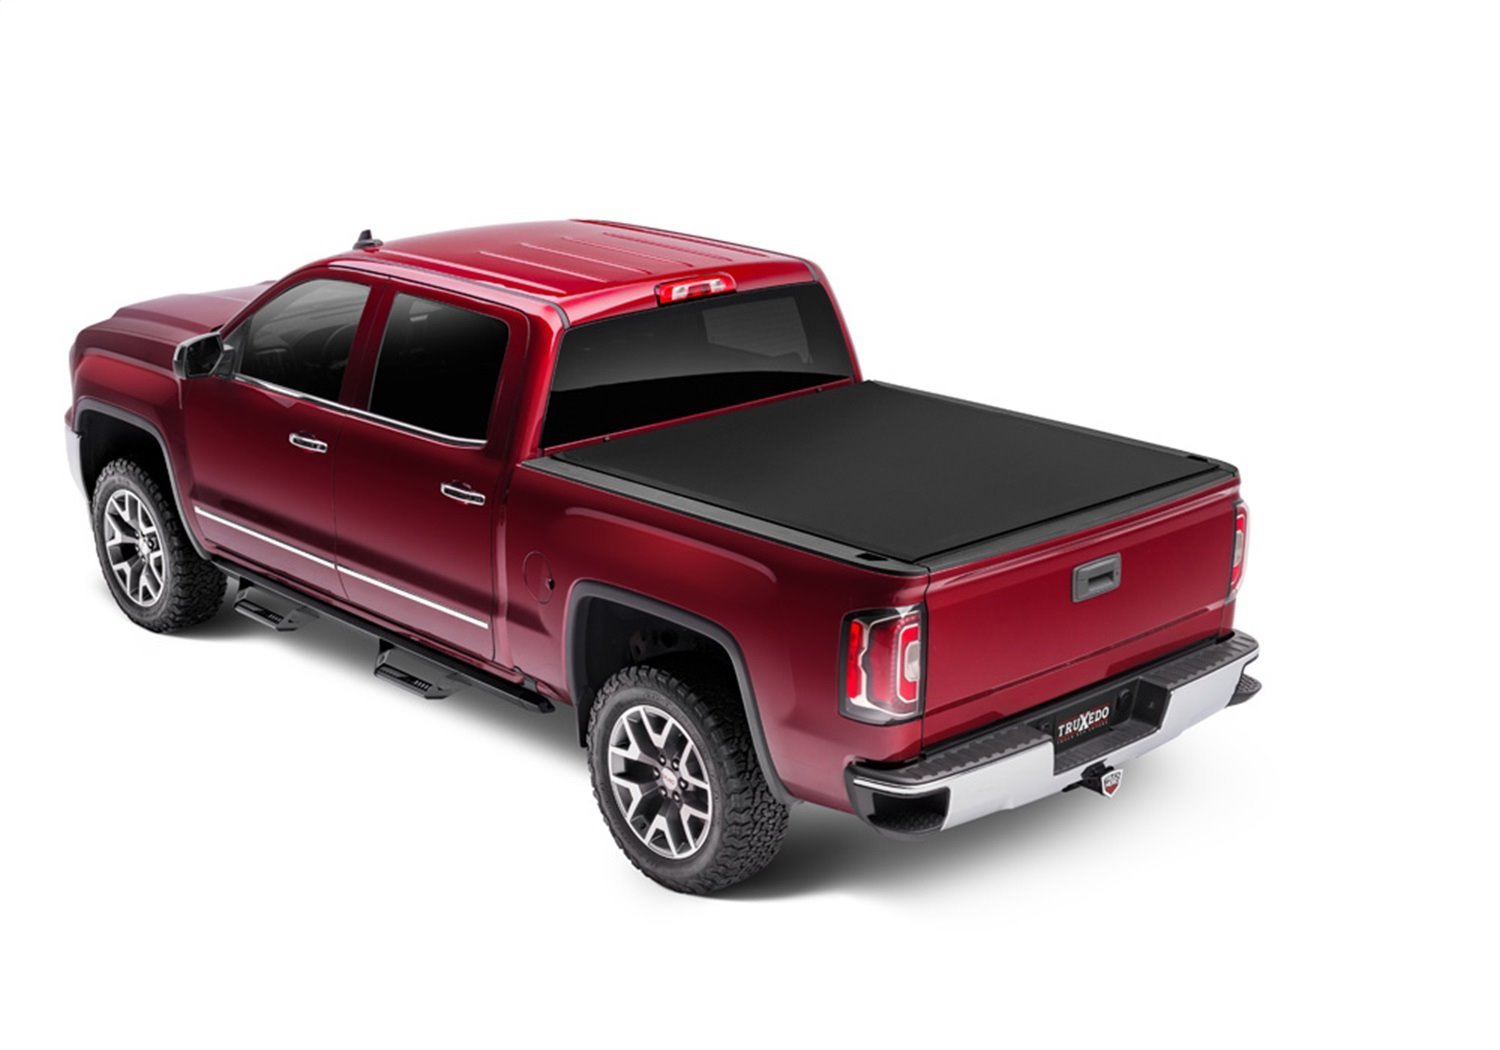 1553316 Sentry CT Hard Roll-Up Tonneau Cover for 2015-2022 Chevy Colorado, GMC Canyon w/6 ft. 2 in. Bed [Matte Black]